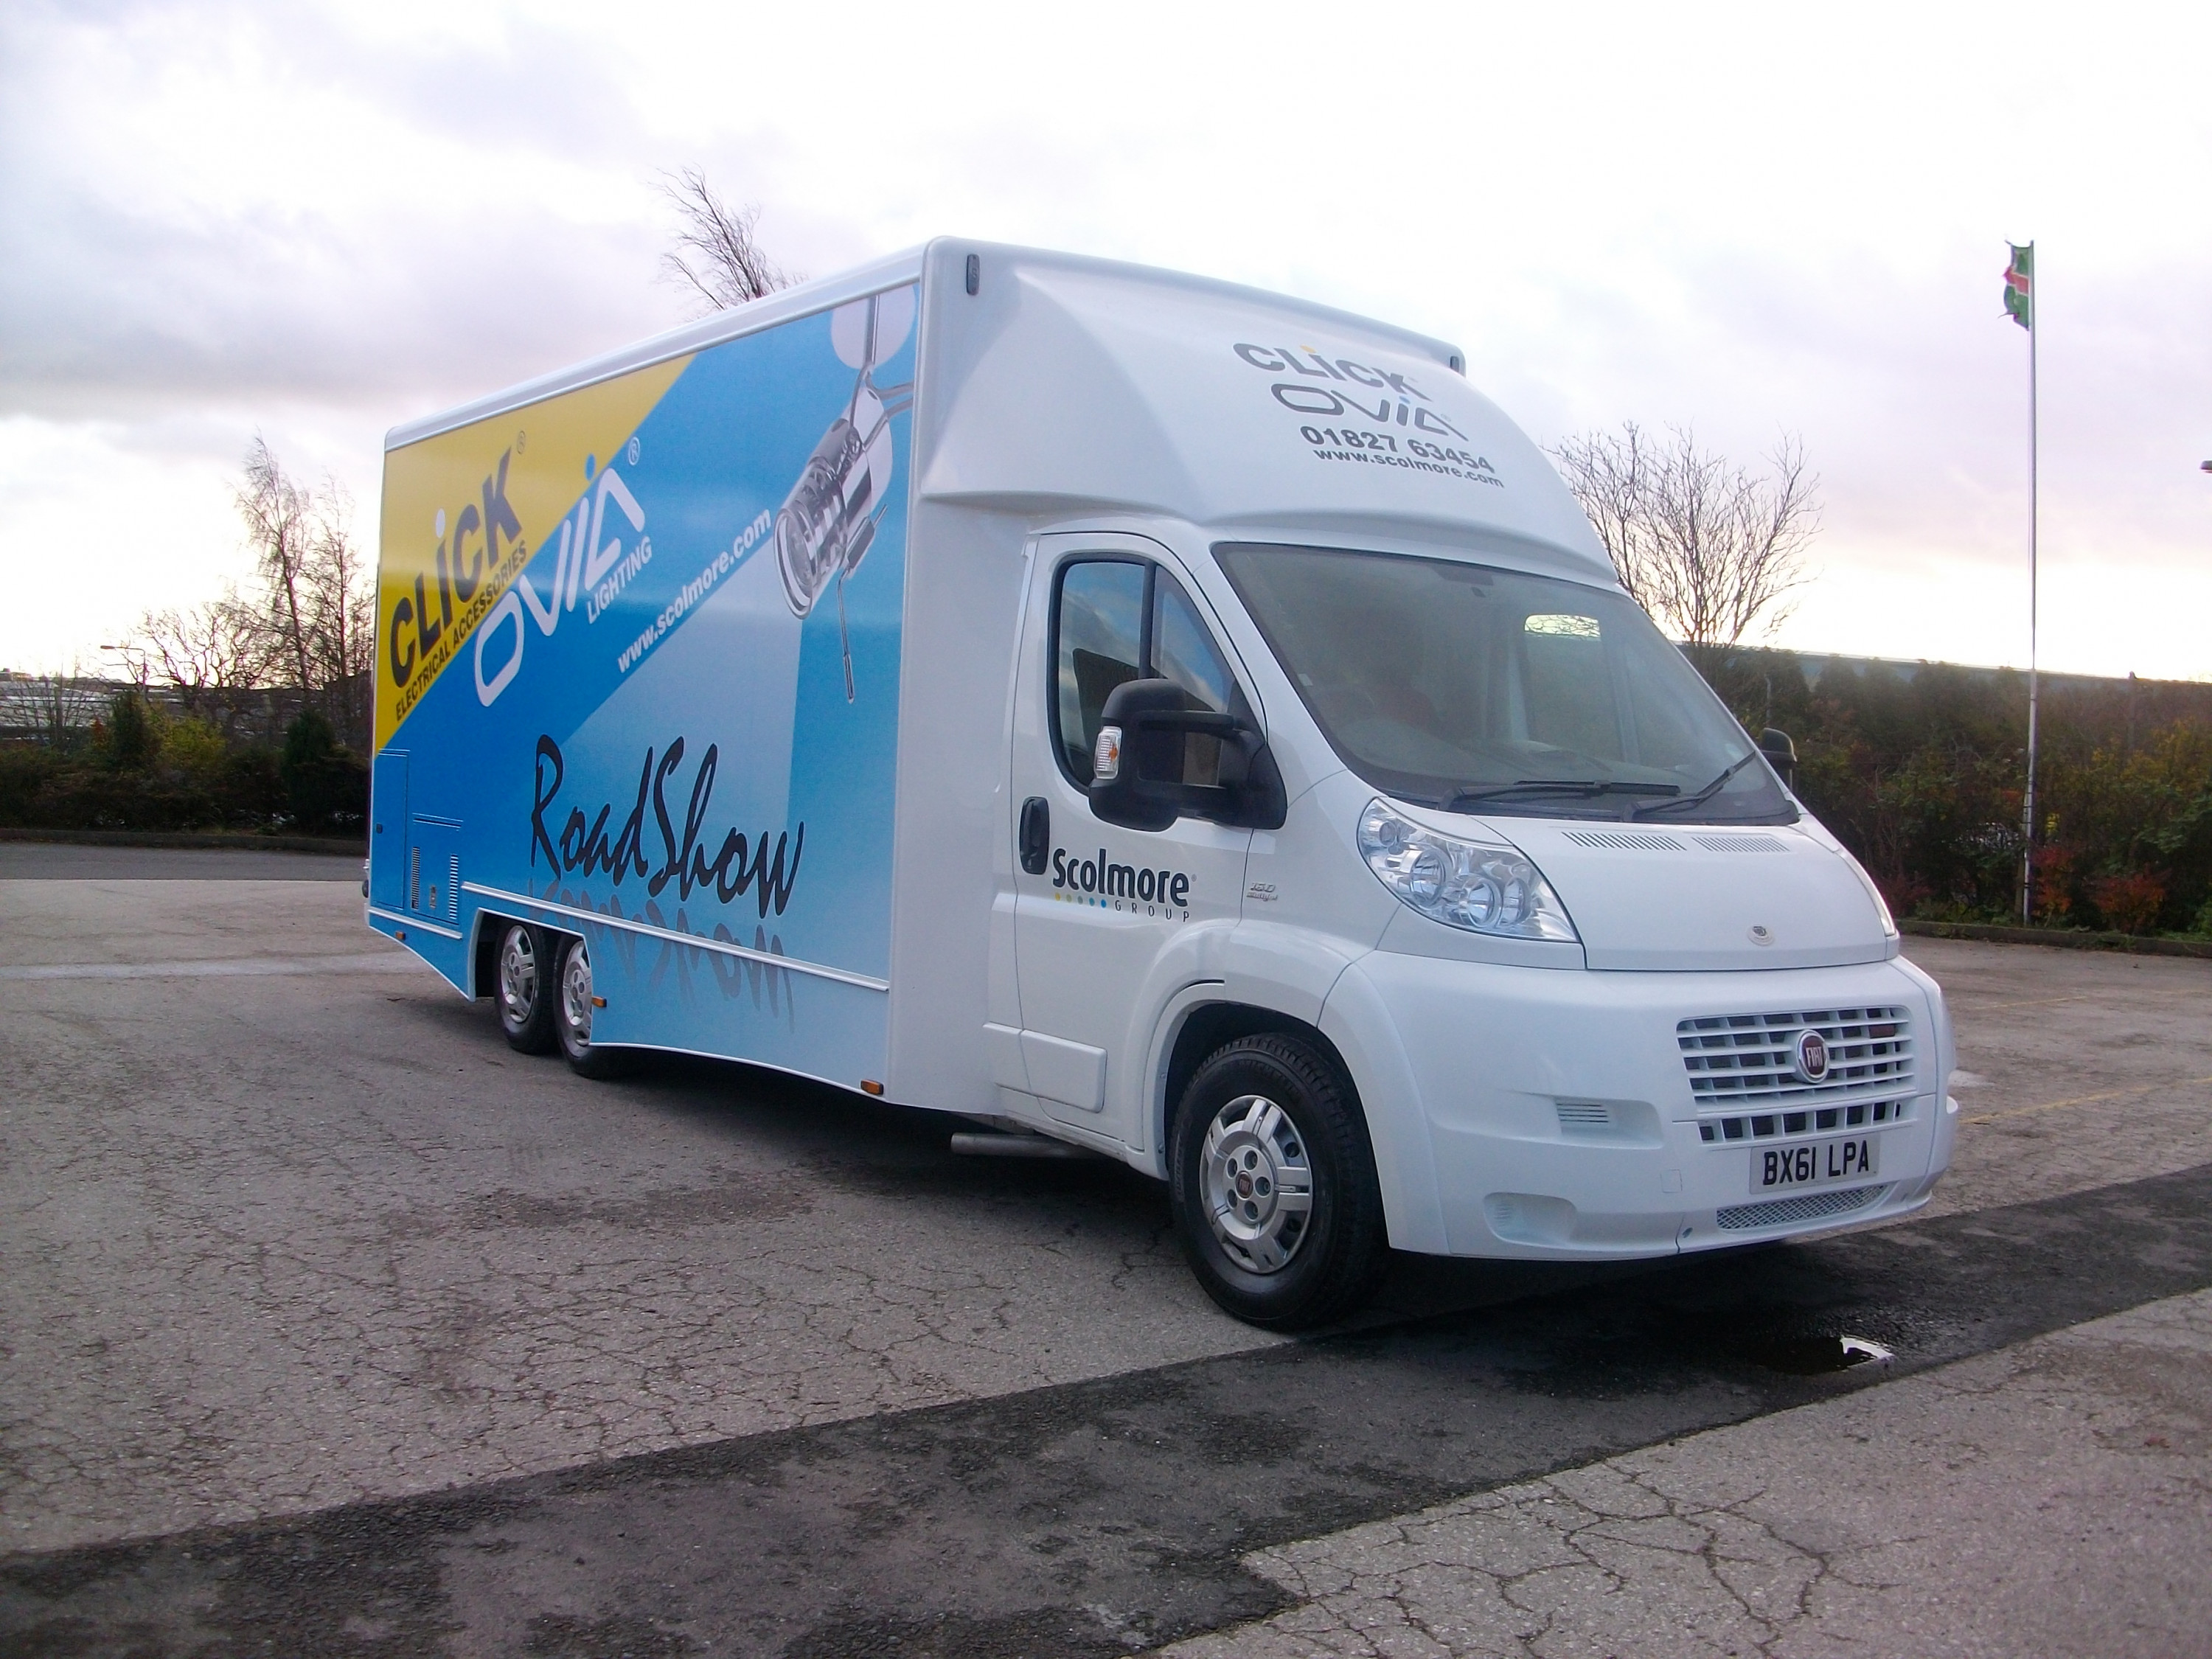 Scolmore Lighting Product Display Vehicle